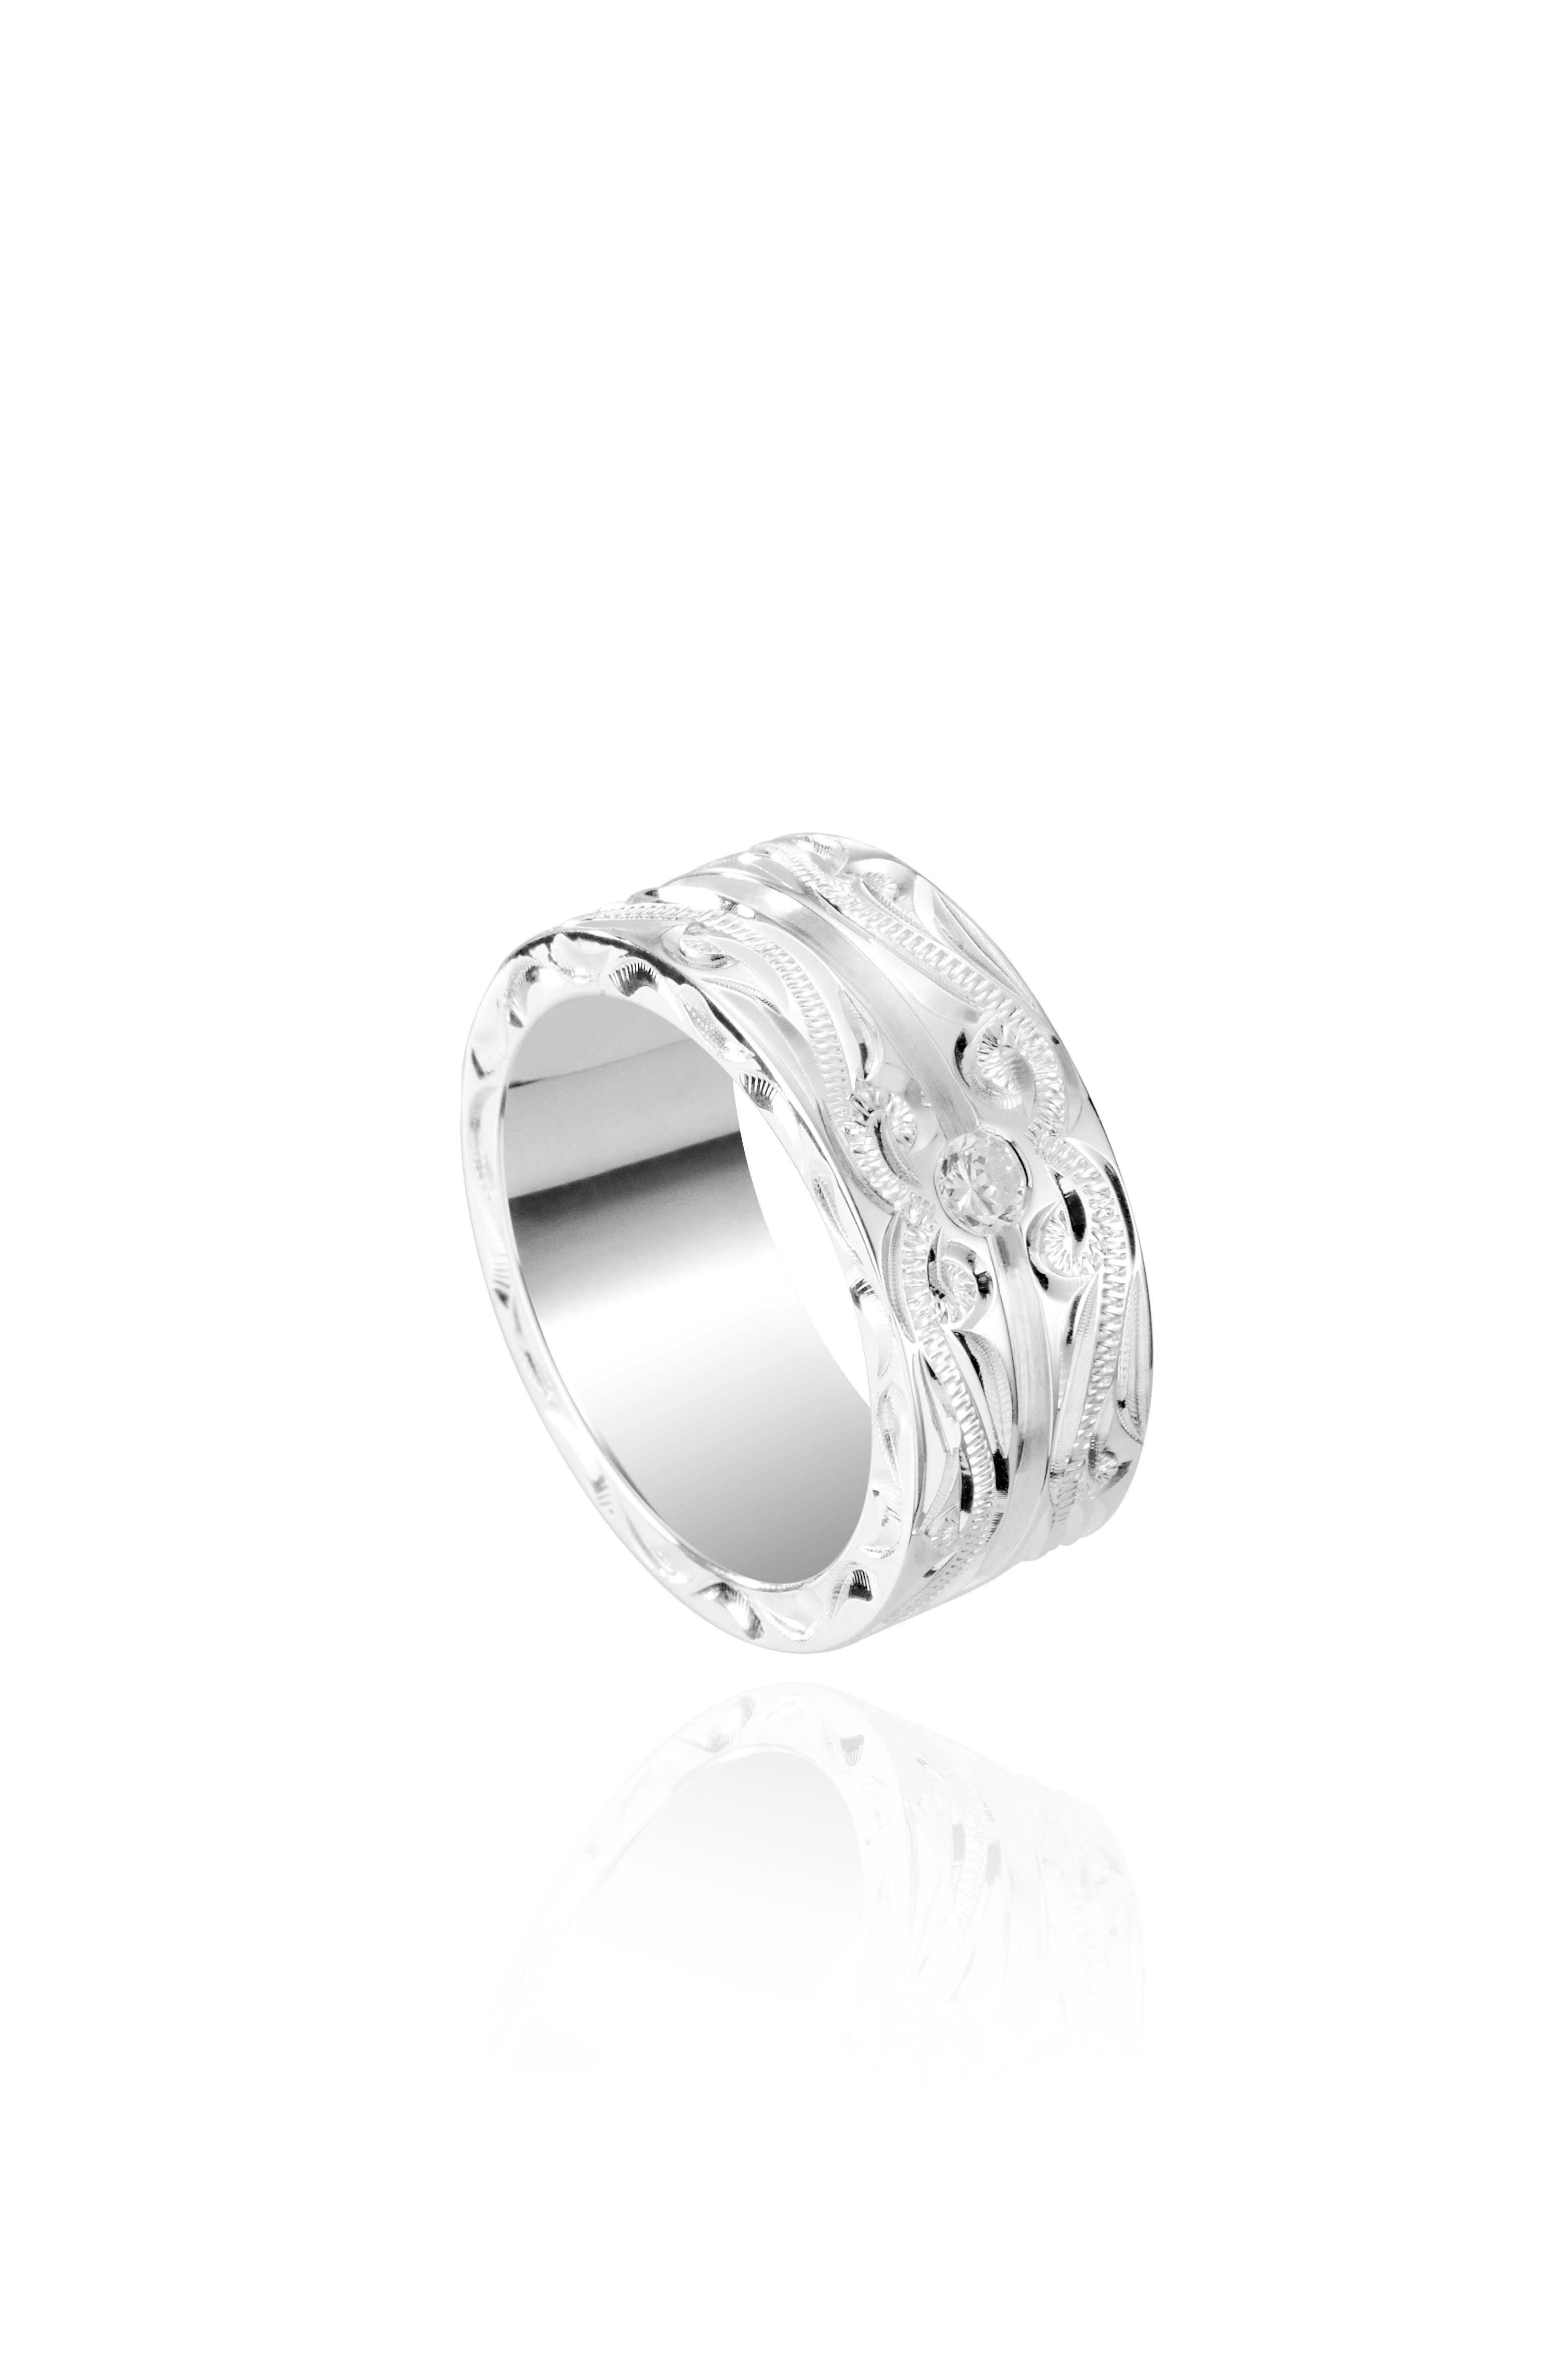 The picture shows a 925 sterling silver channel ring with hand engravings and diamonds.